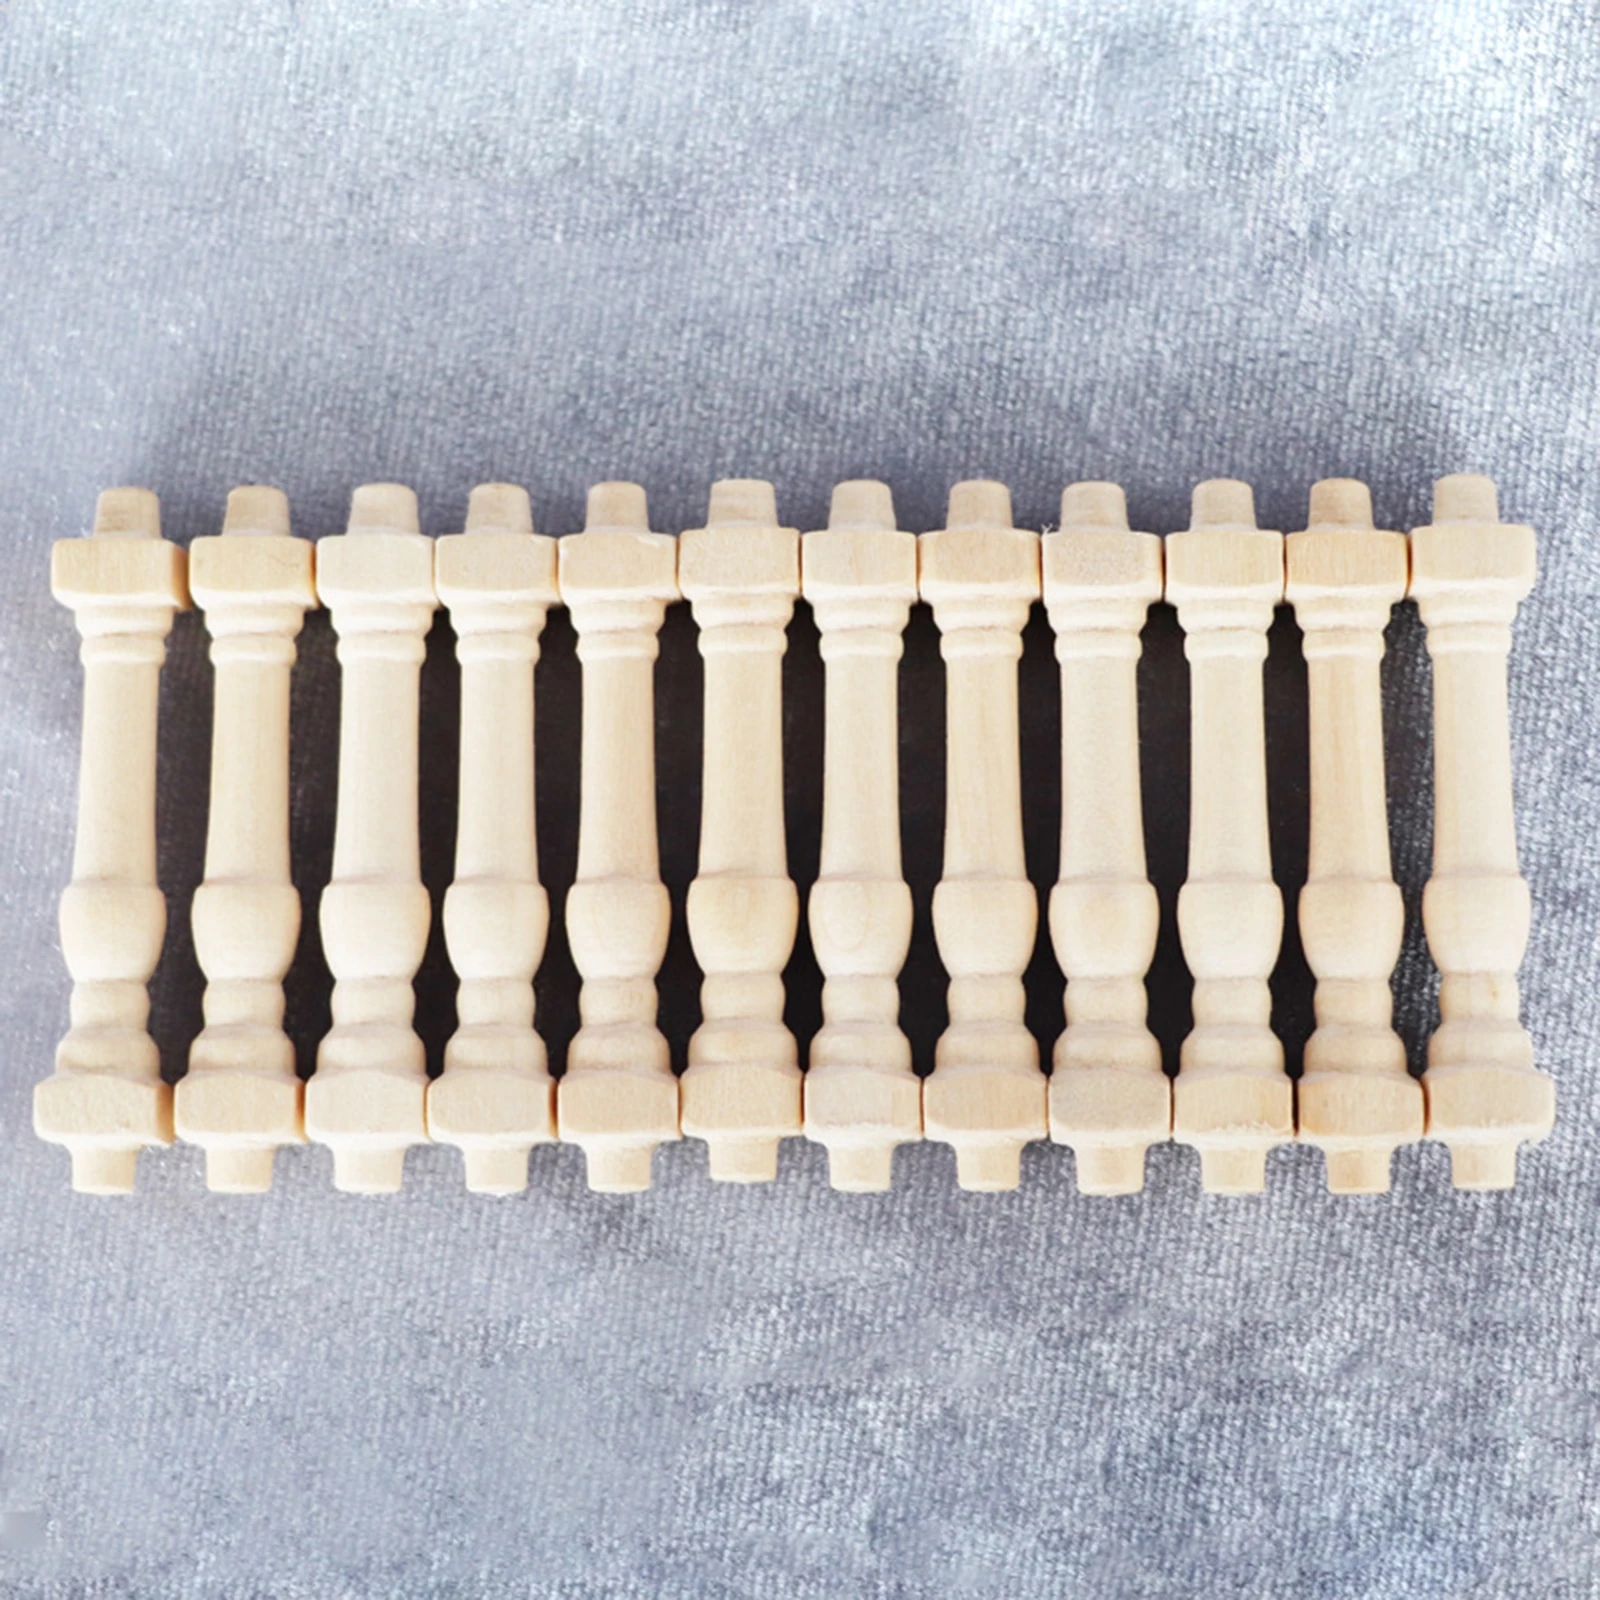 12pcs Dollhouse Builders Timber 1:12 Wood Balusters for Balcony Railing